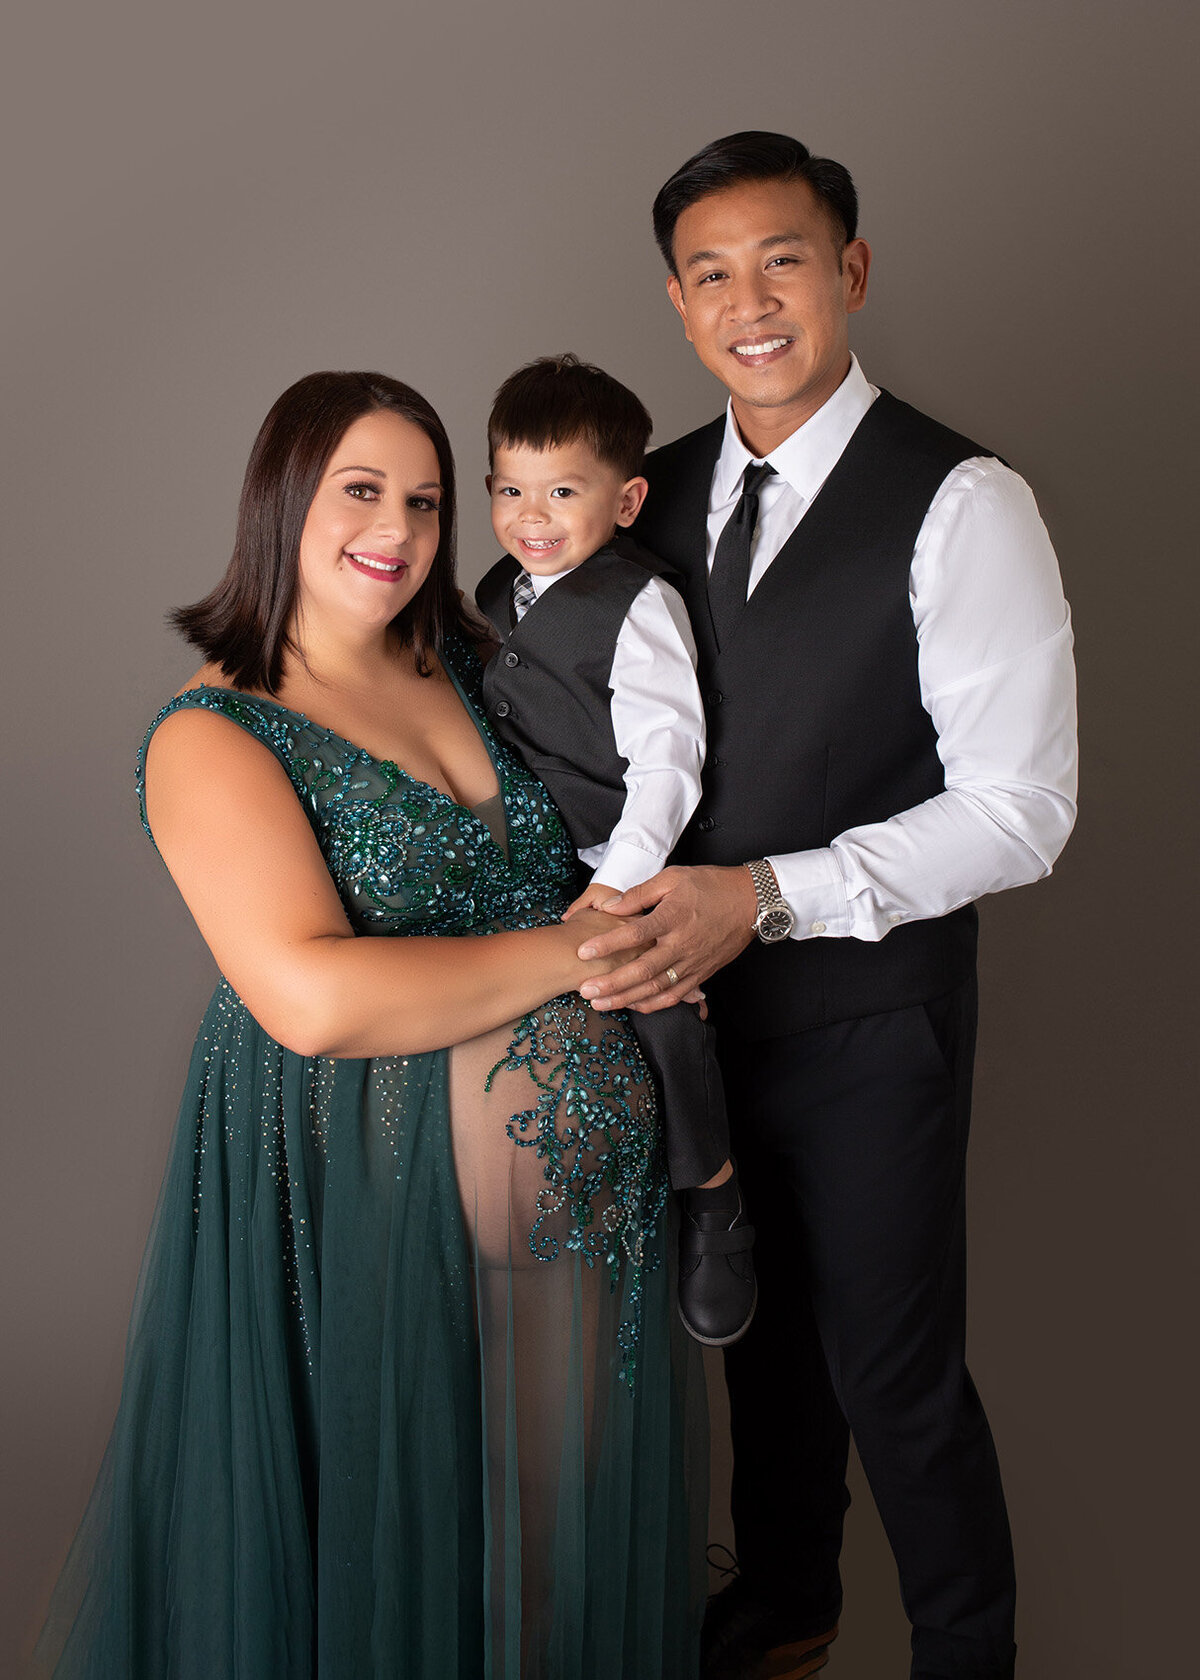 Portait of a well dressed family expecting their second child in Houston Texas, captured by Laura King Photography